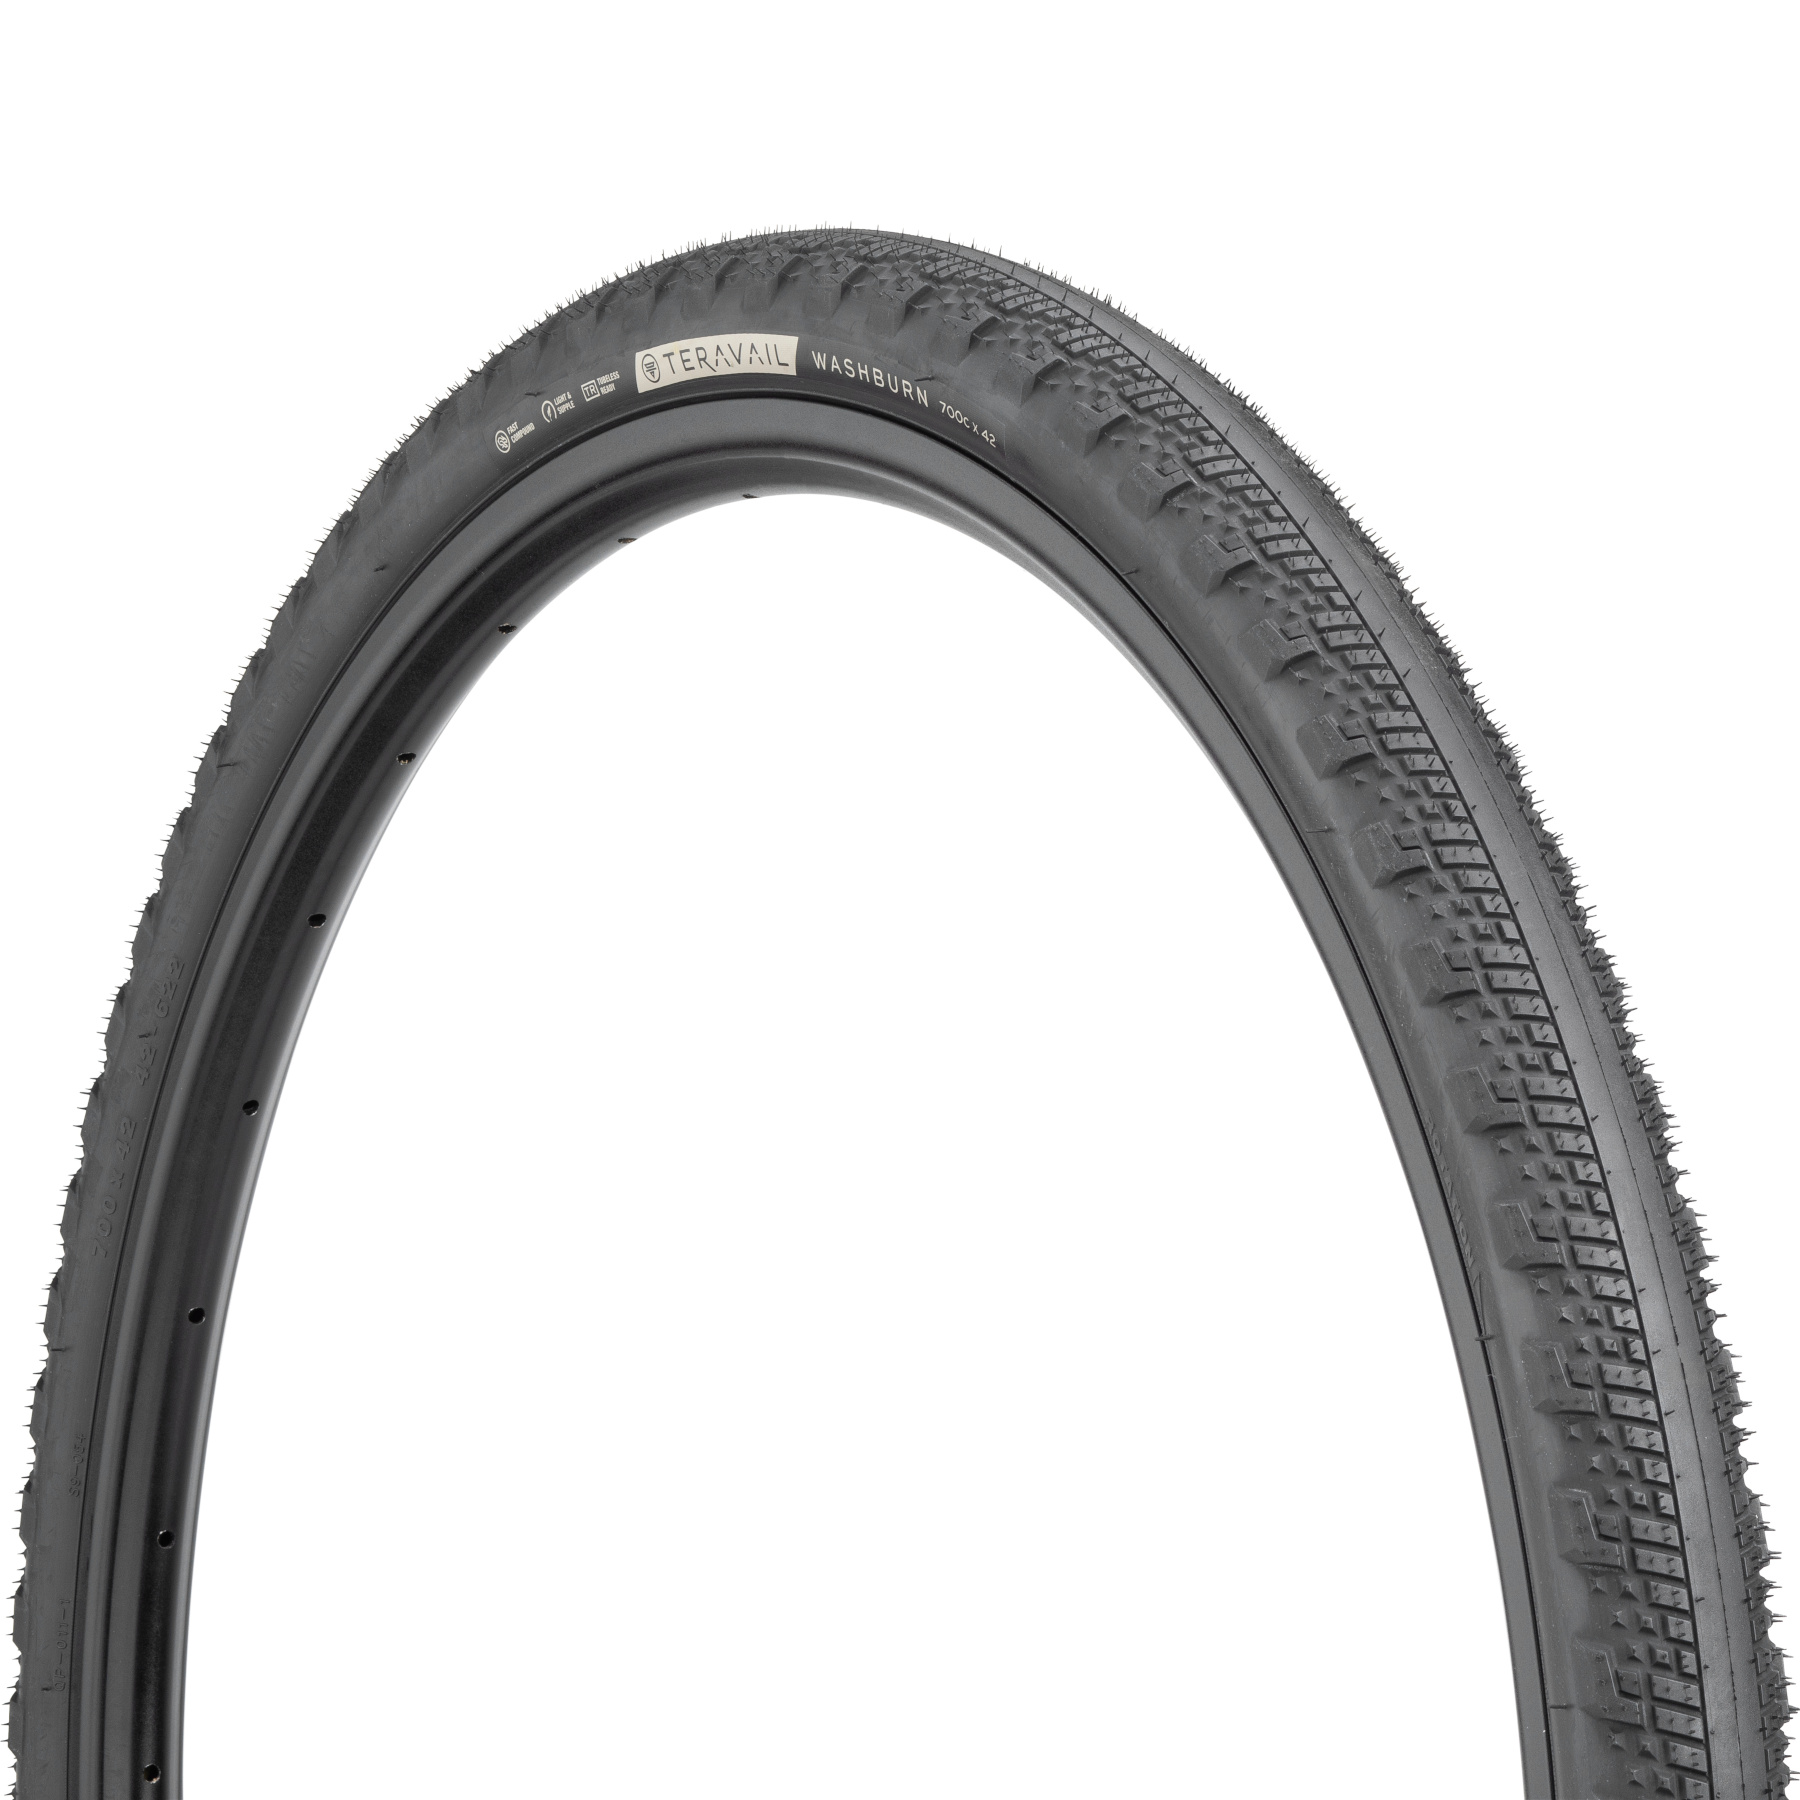 Picture of Teravail Washburn Gravel Folding Tire - Light and Supple - 47-622 | black